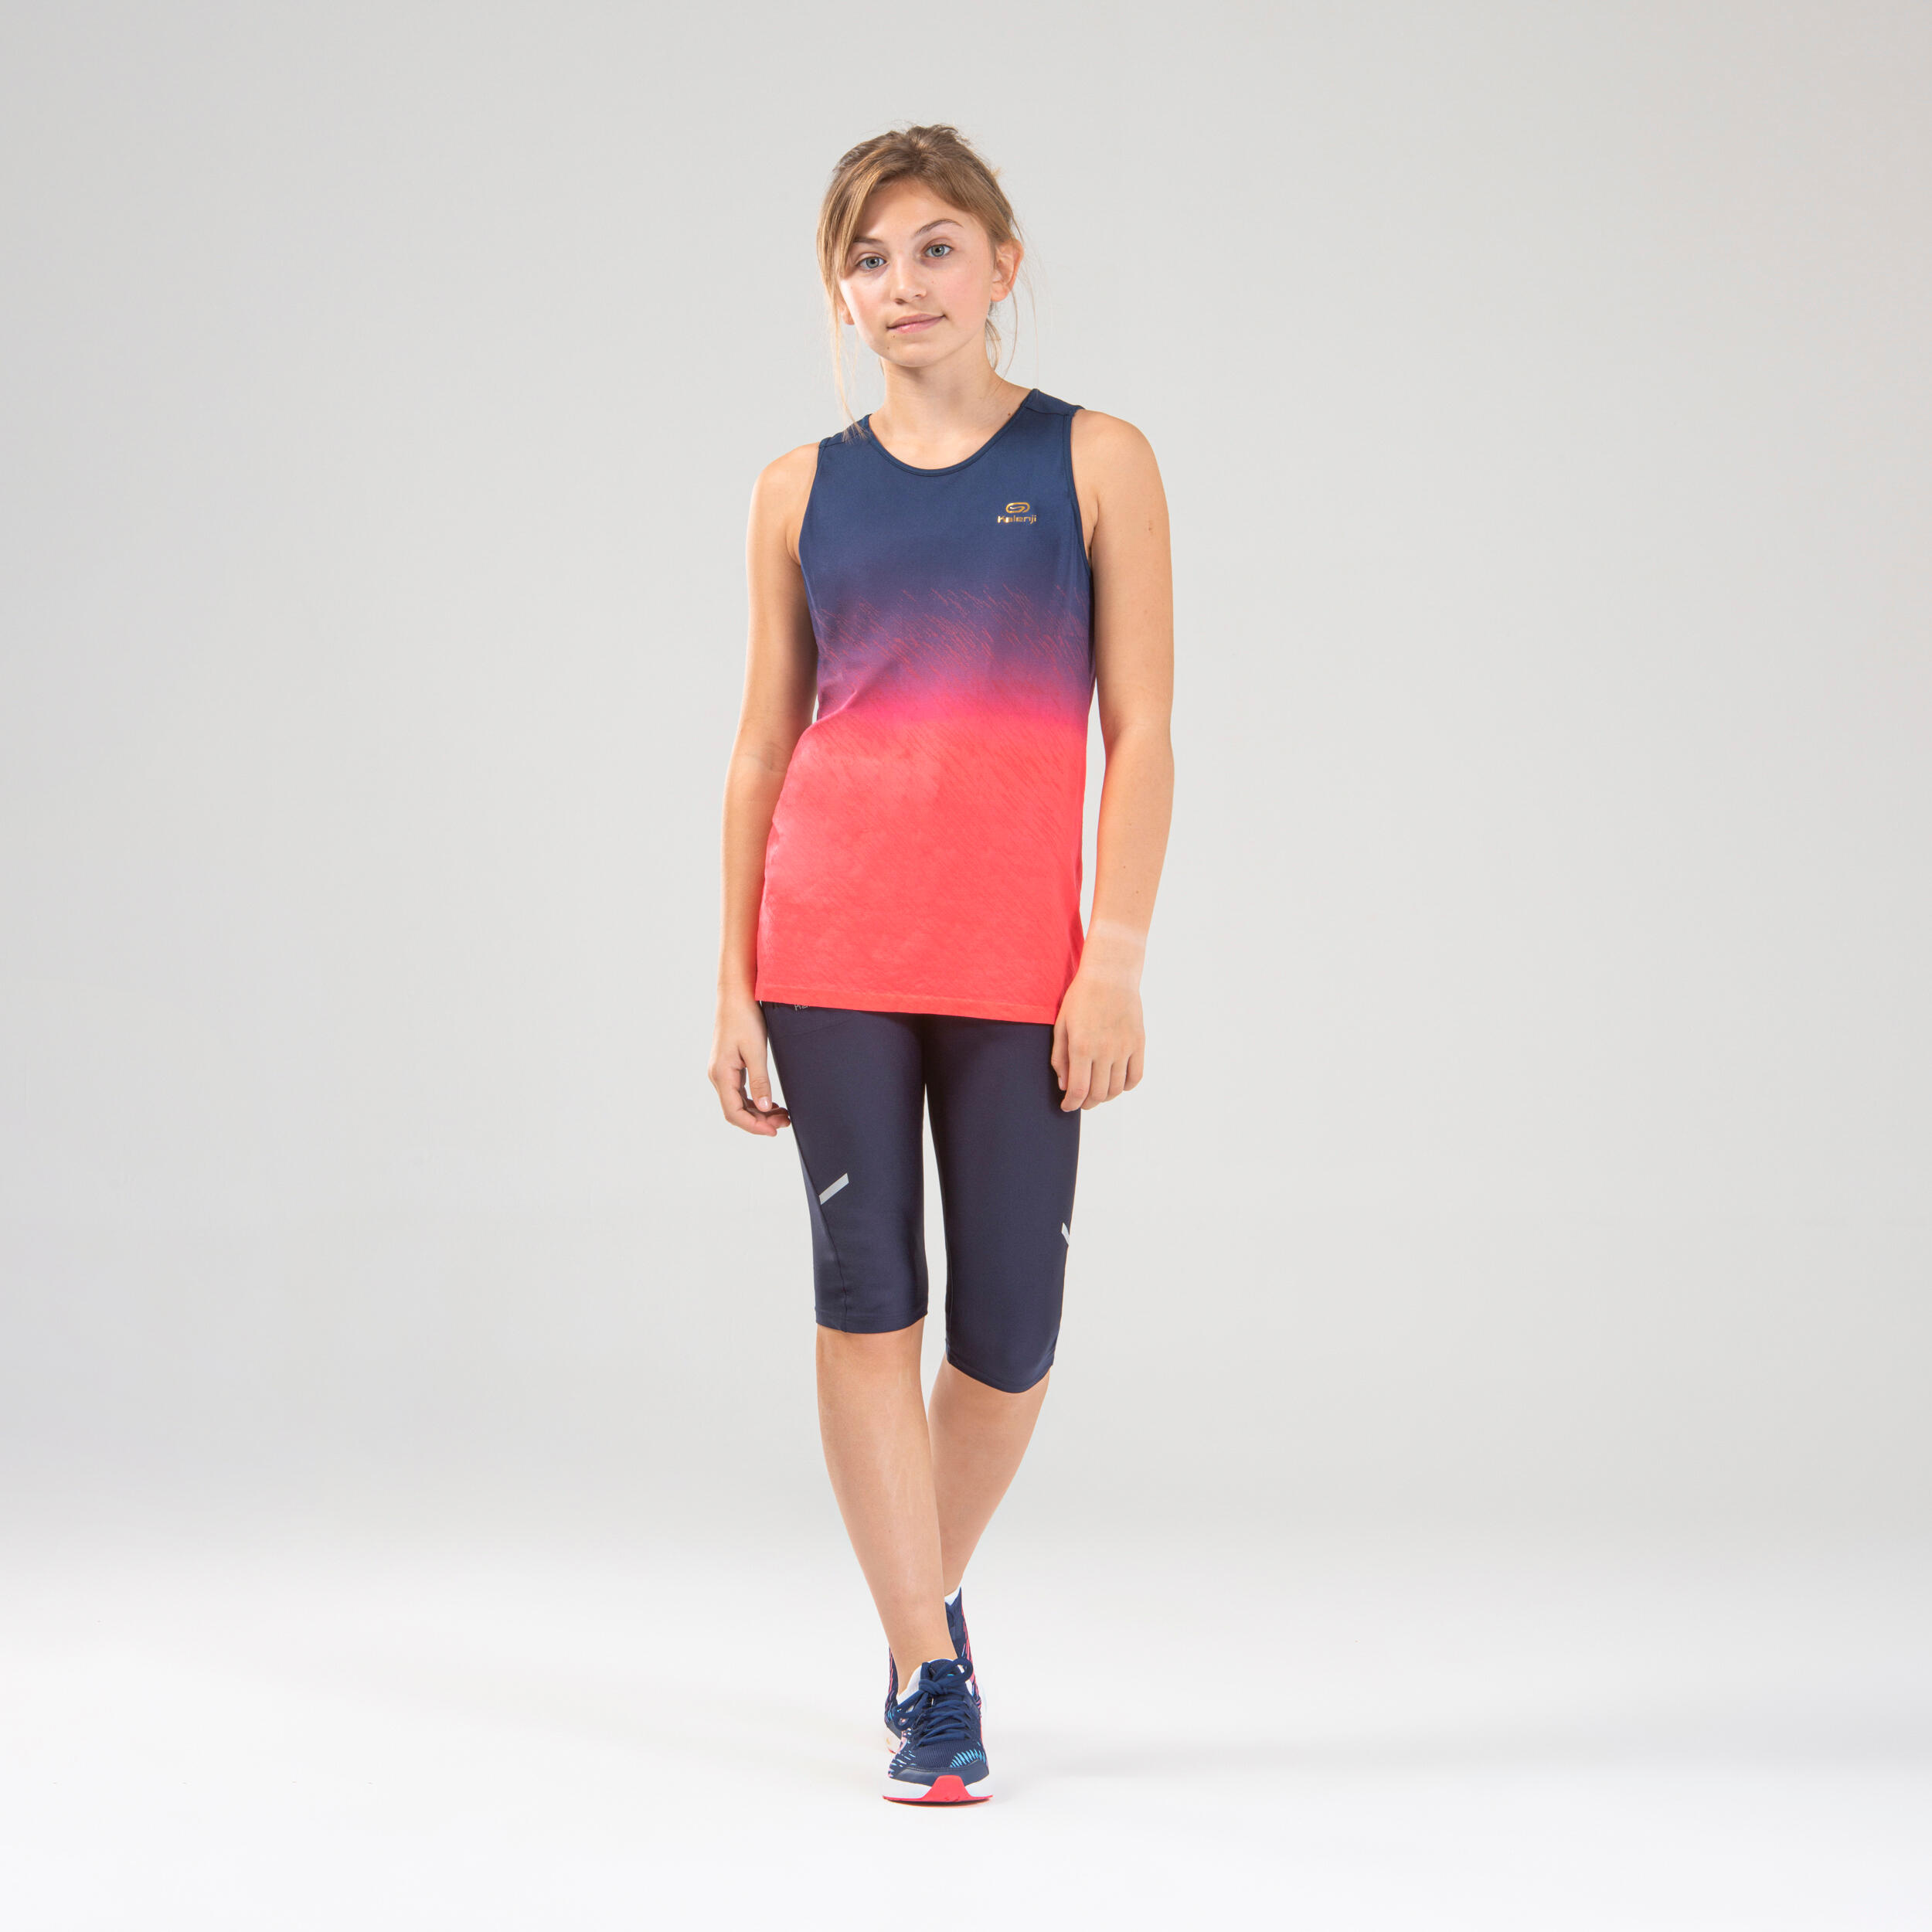 AT 500 Girl's lightweight running and athletics tank top - blue and neon pink 2/7